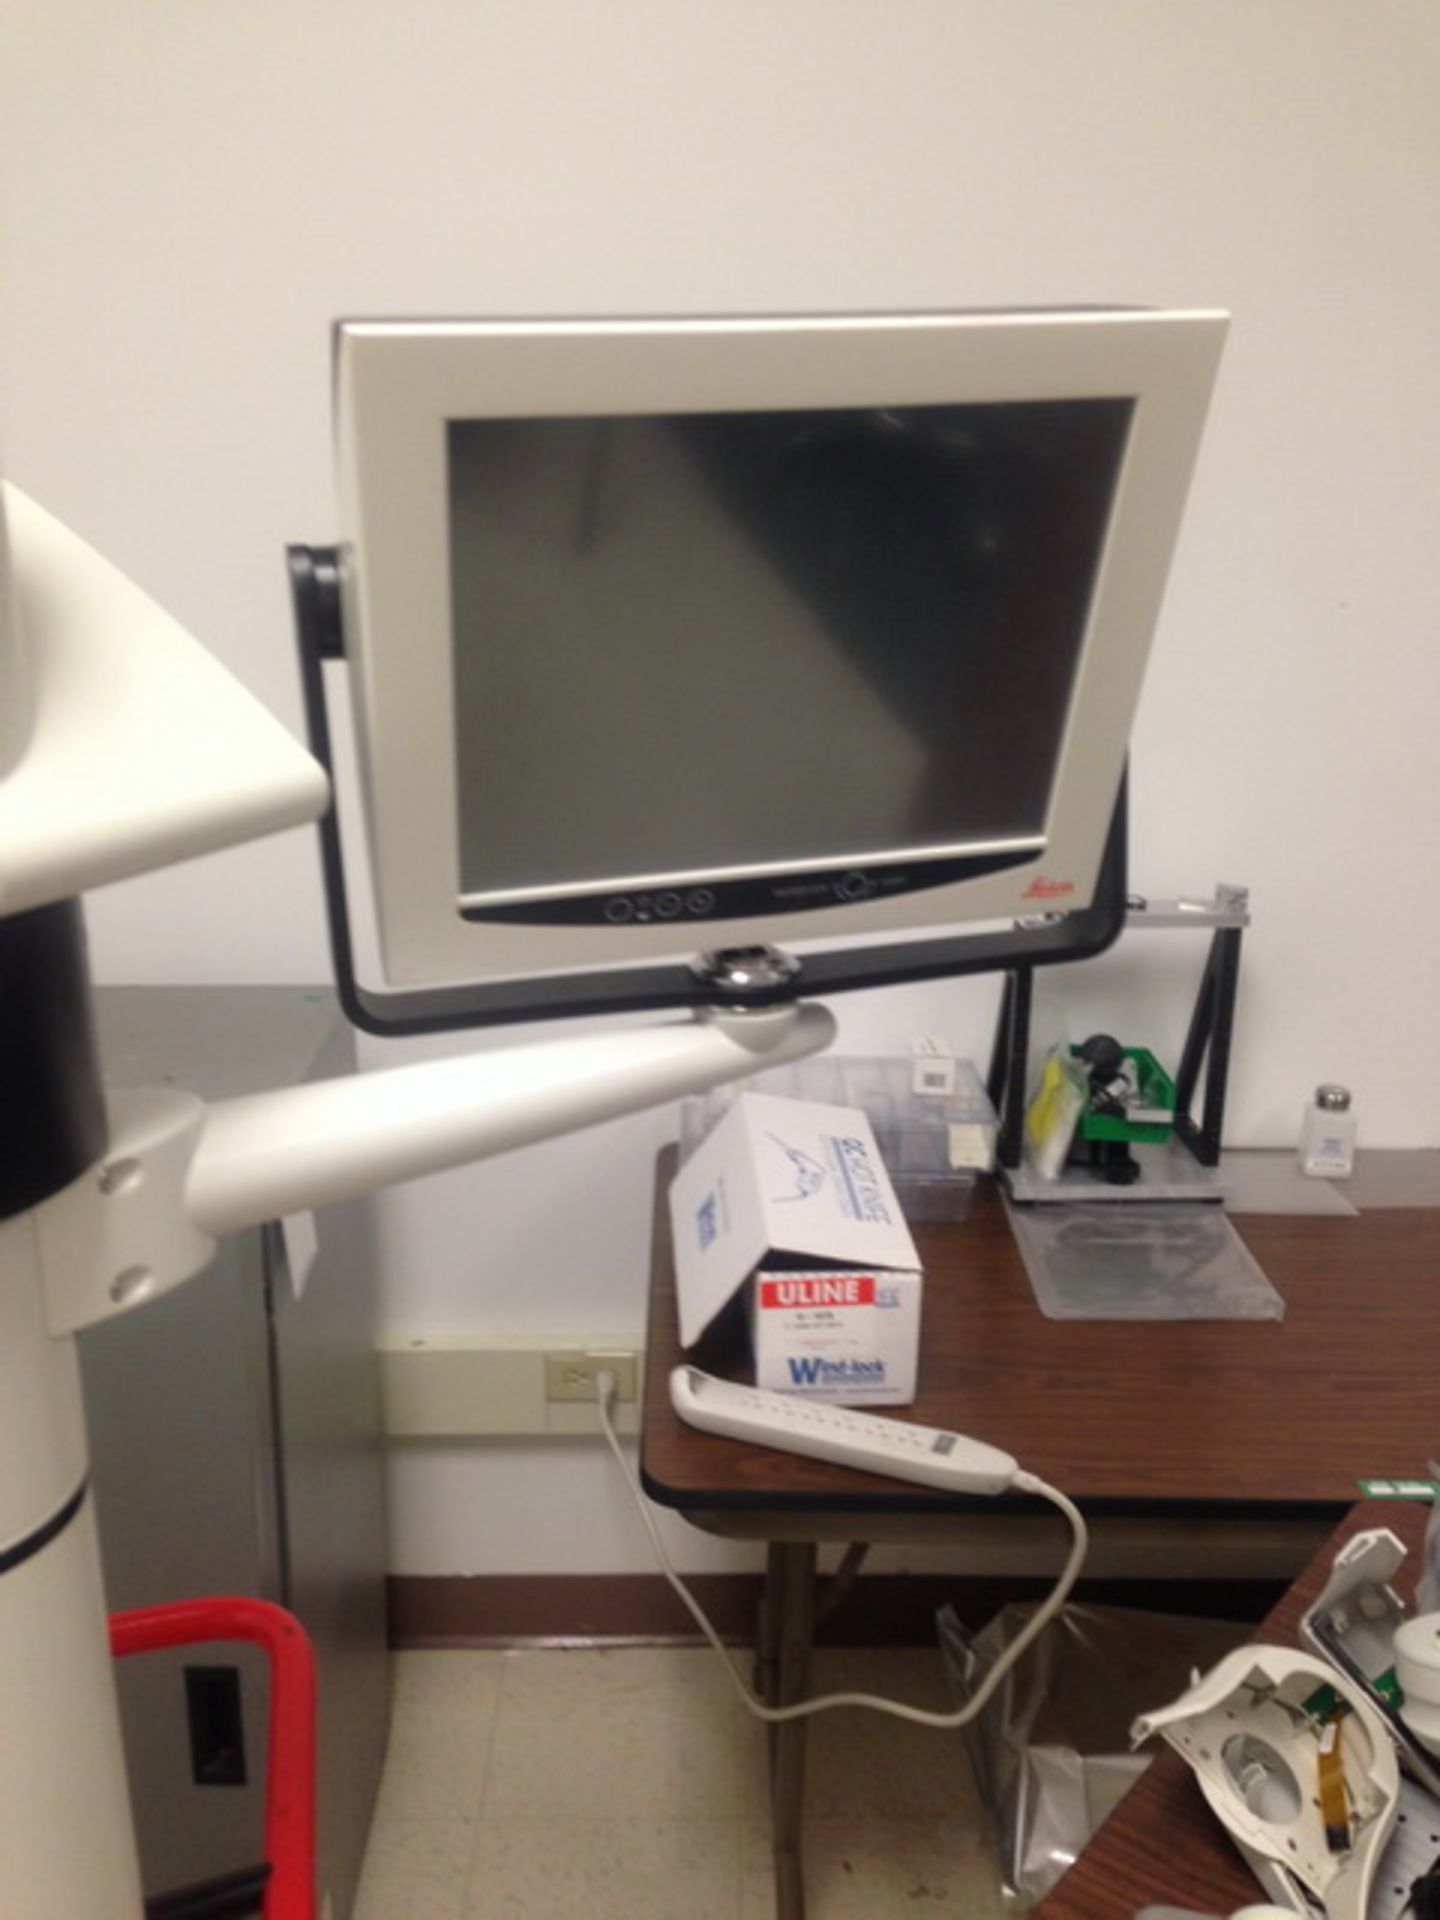 Leica M822/M844 F40 Ophthalmic Surgical Microscope On Floor Stand s/n-020306003 [Currently - Image 8 of 13